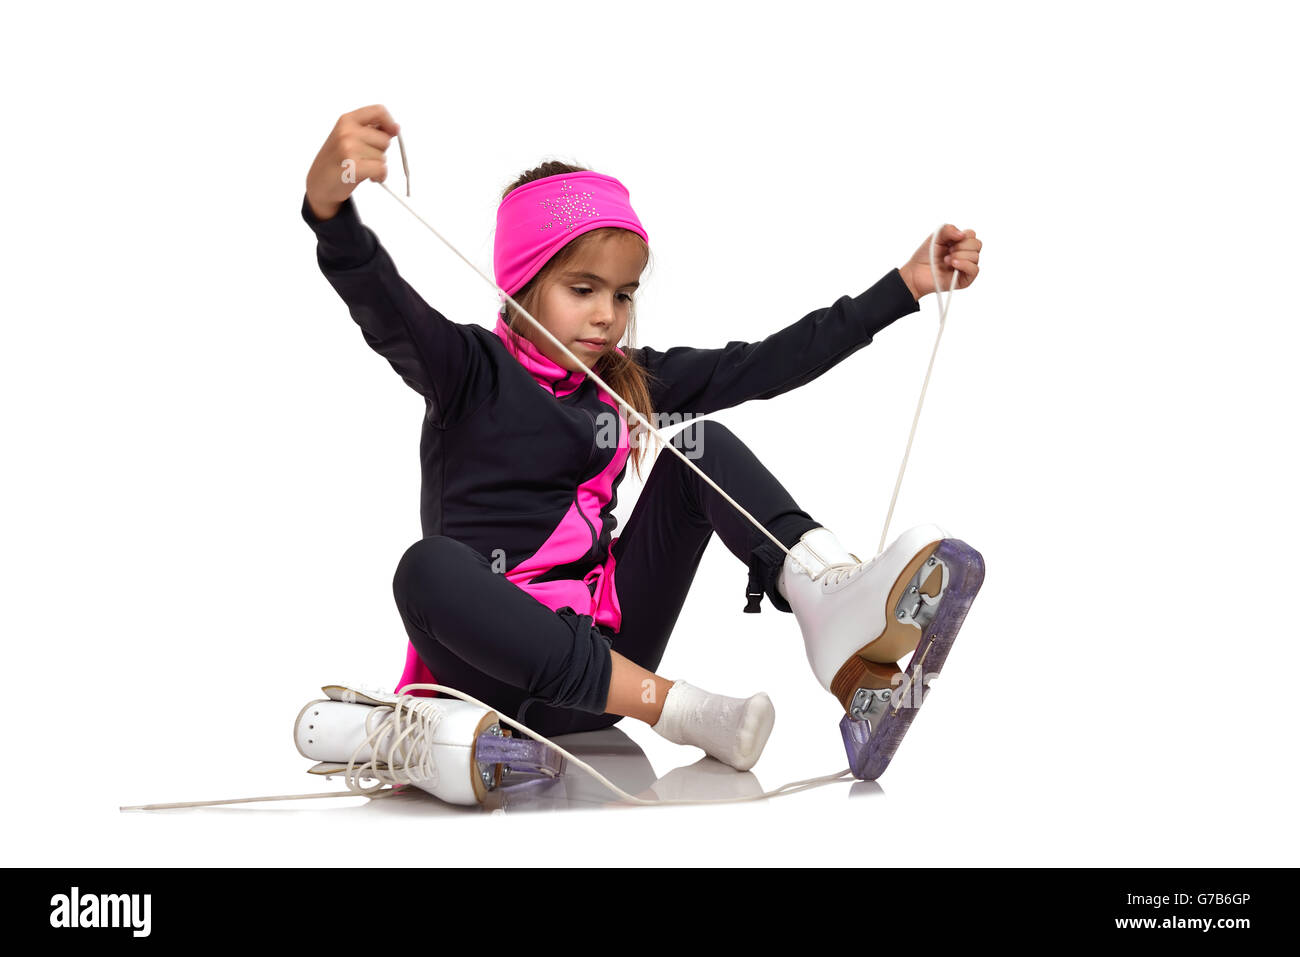 young girl figure skating skates laces Stock Photo